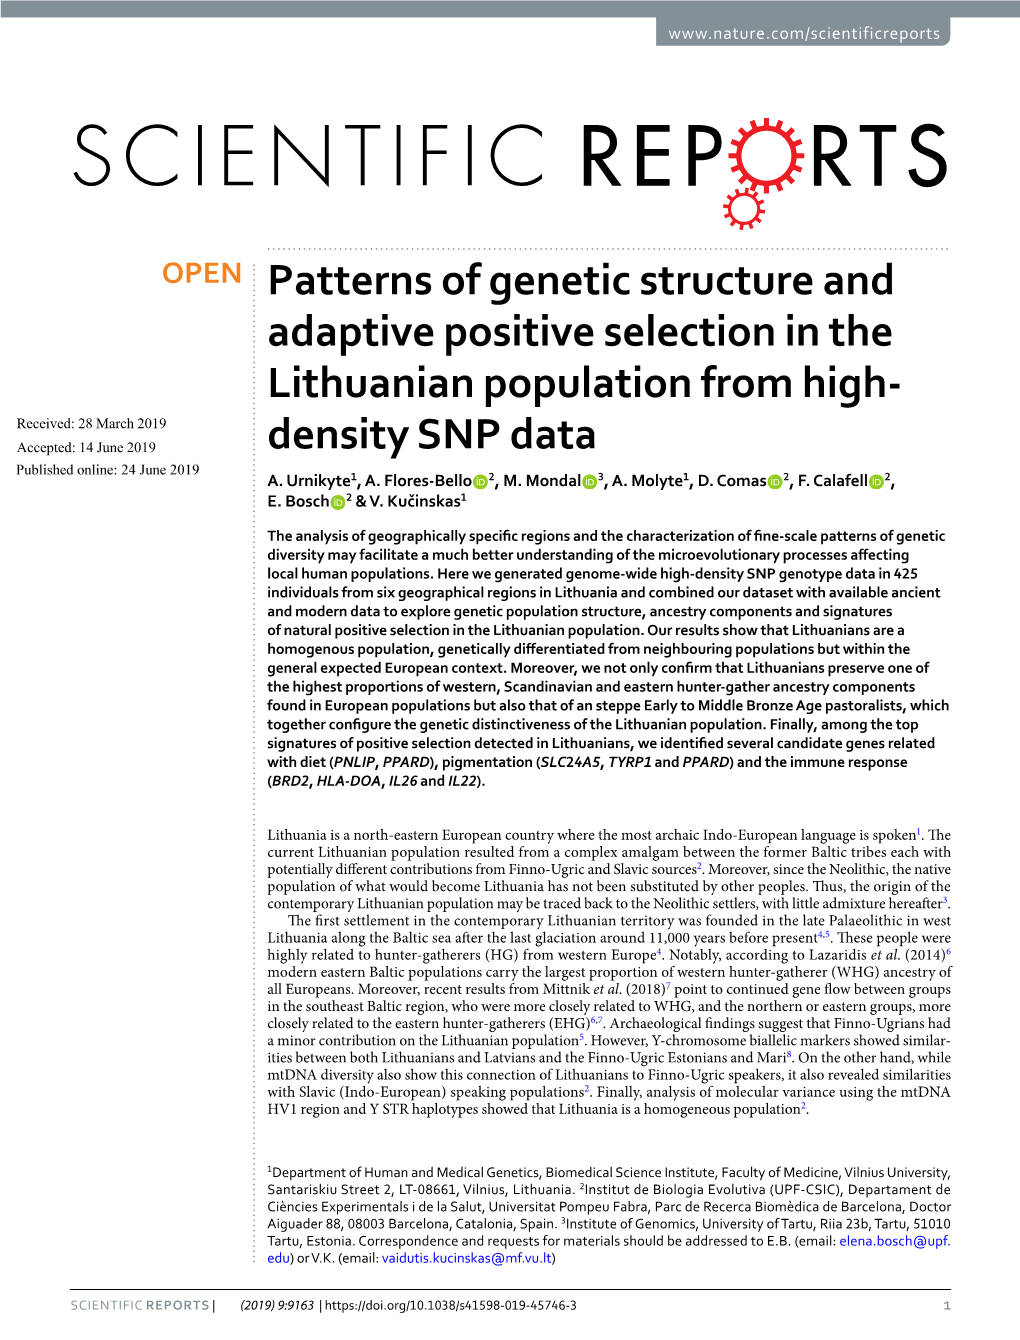 Patterns of Genetic Structure and Adaptive Positive Selection in The